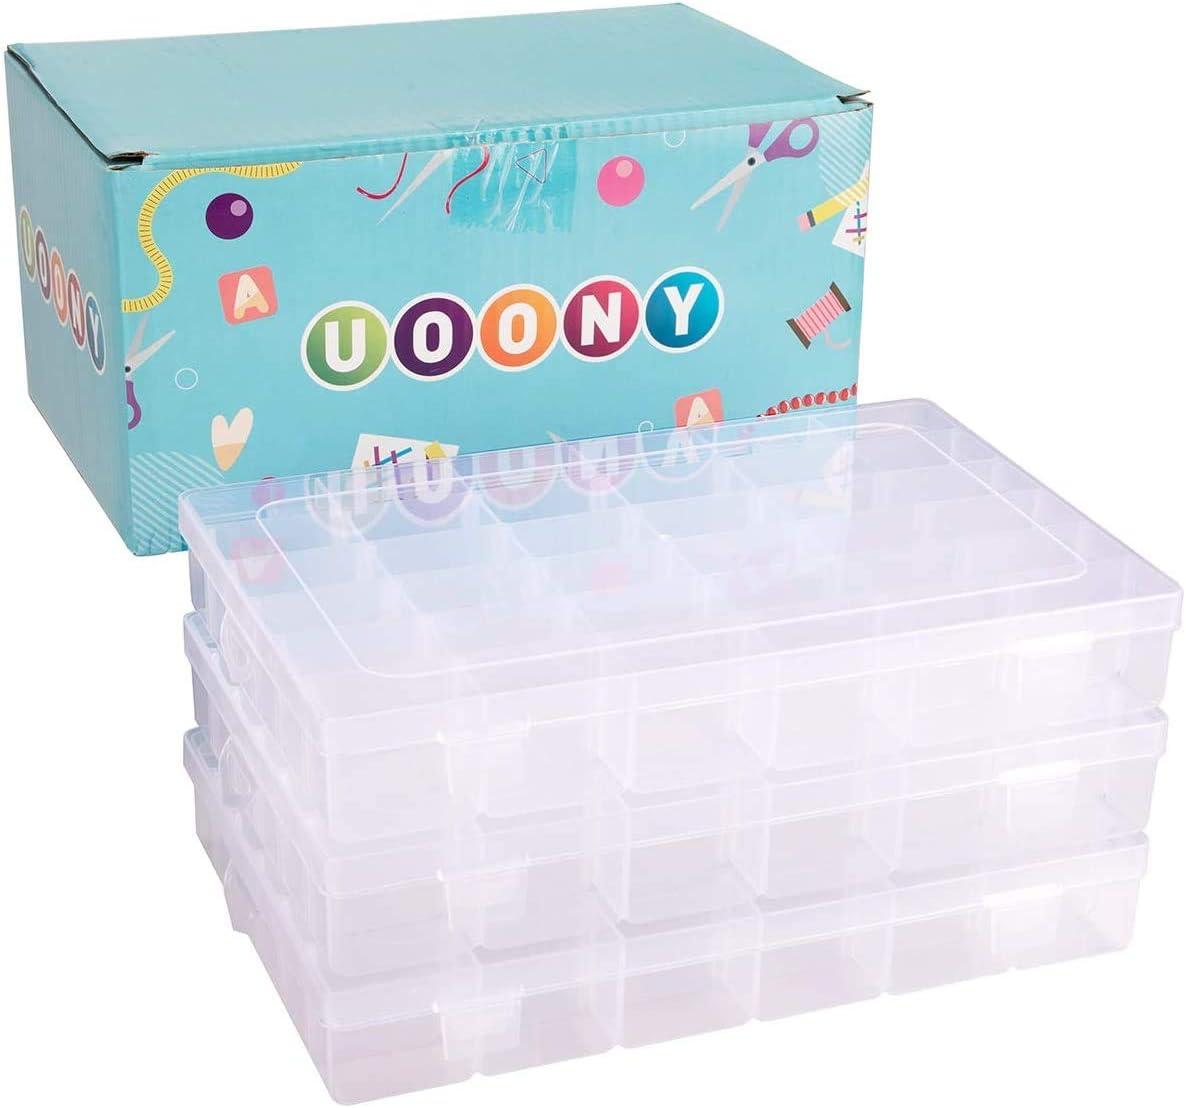 UOONY 3 Pack 36 Grids Plastic Organizer Box Craft Storage with Adjustable  Dividers, Bead Organizer Container for Earrings Fishing Tackles Crafts  Jewelry Thread with 400pcs Label Stickers